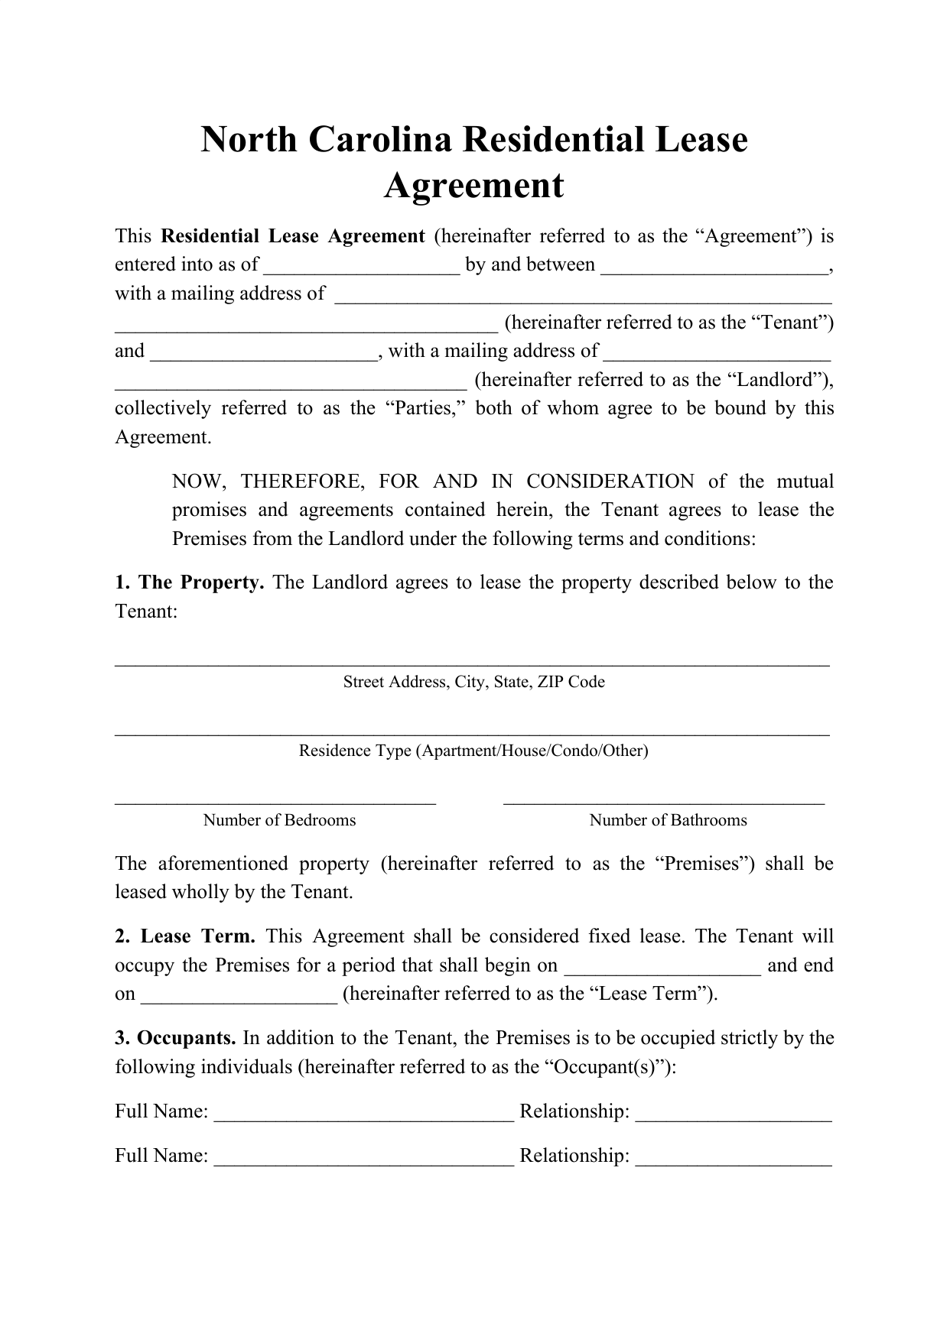 north carolina residential lease agreement template download printable